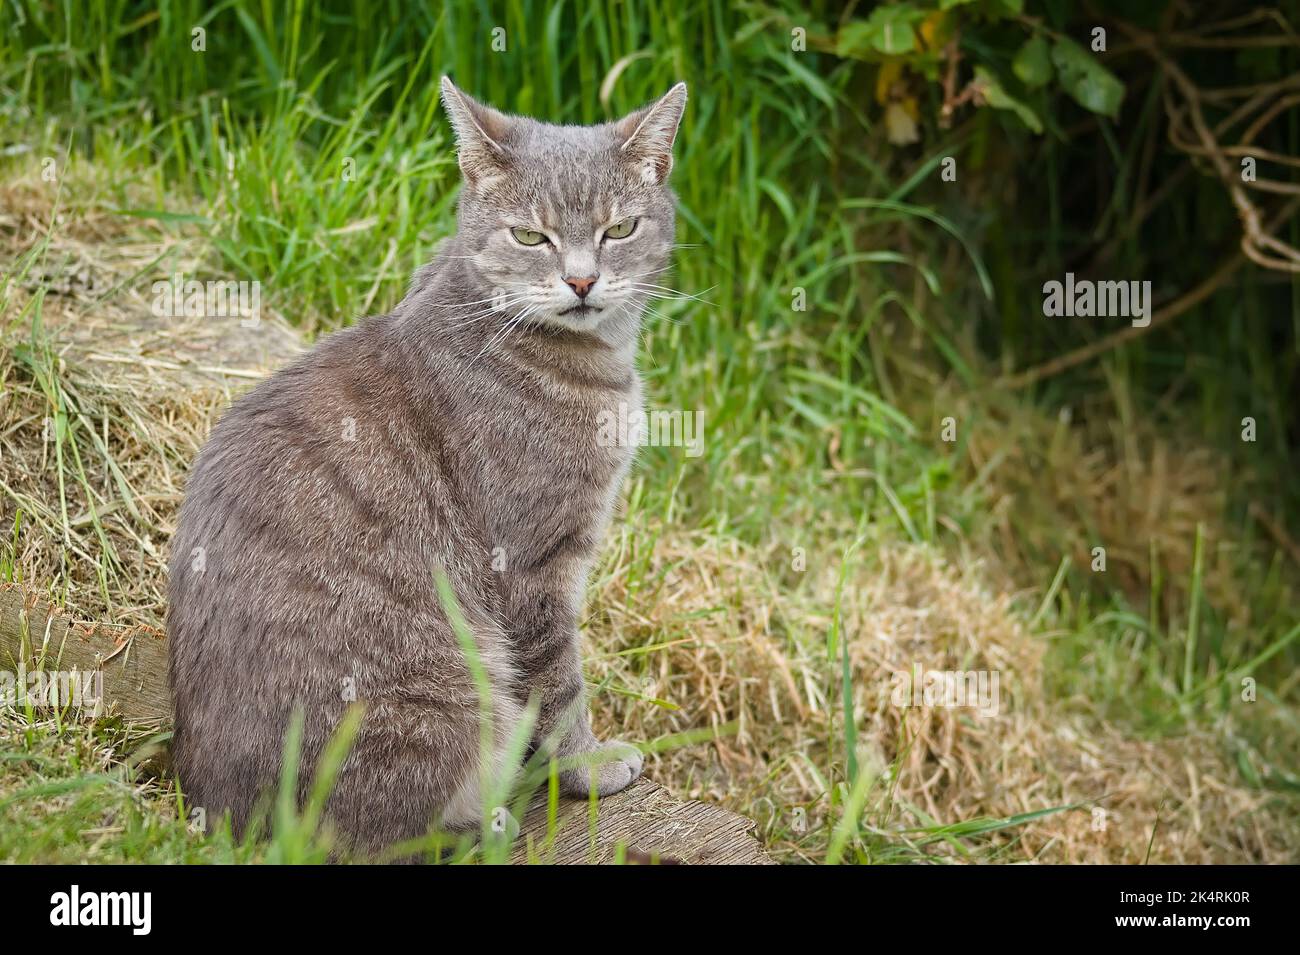 Shorthaired tabby cat sitting in the long grass Stock Photo